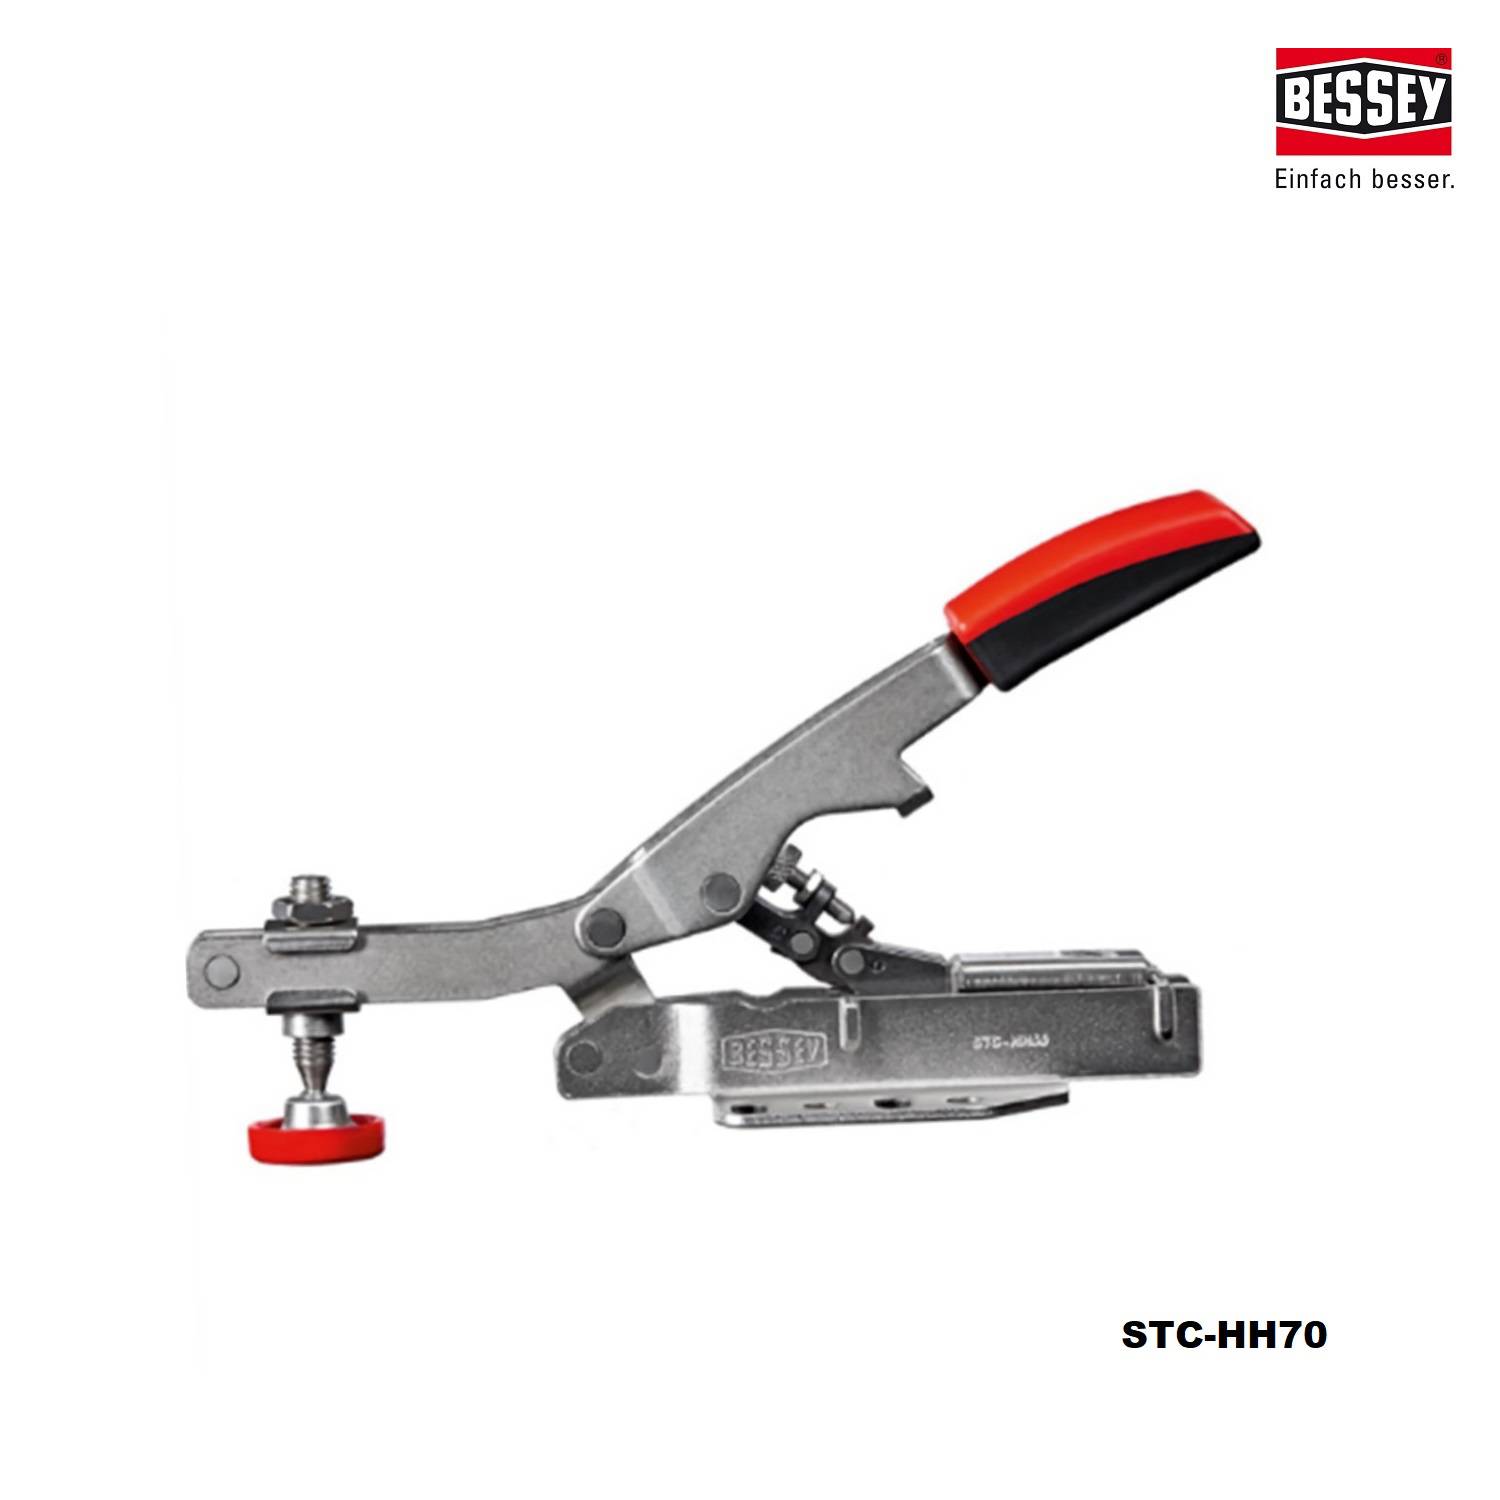 snelspanner_bessey_stc_hh70